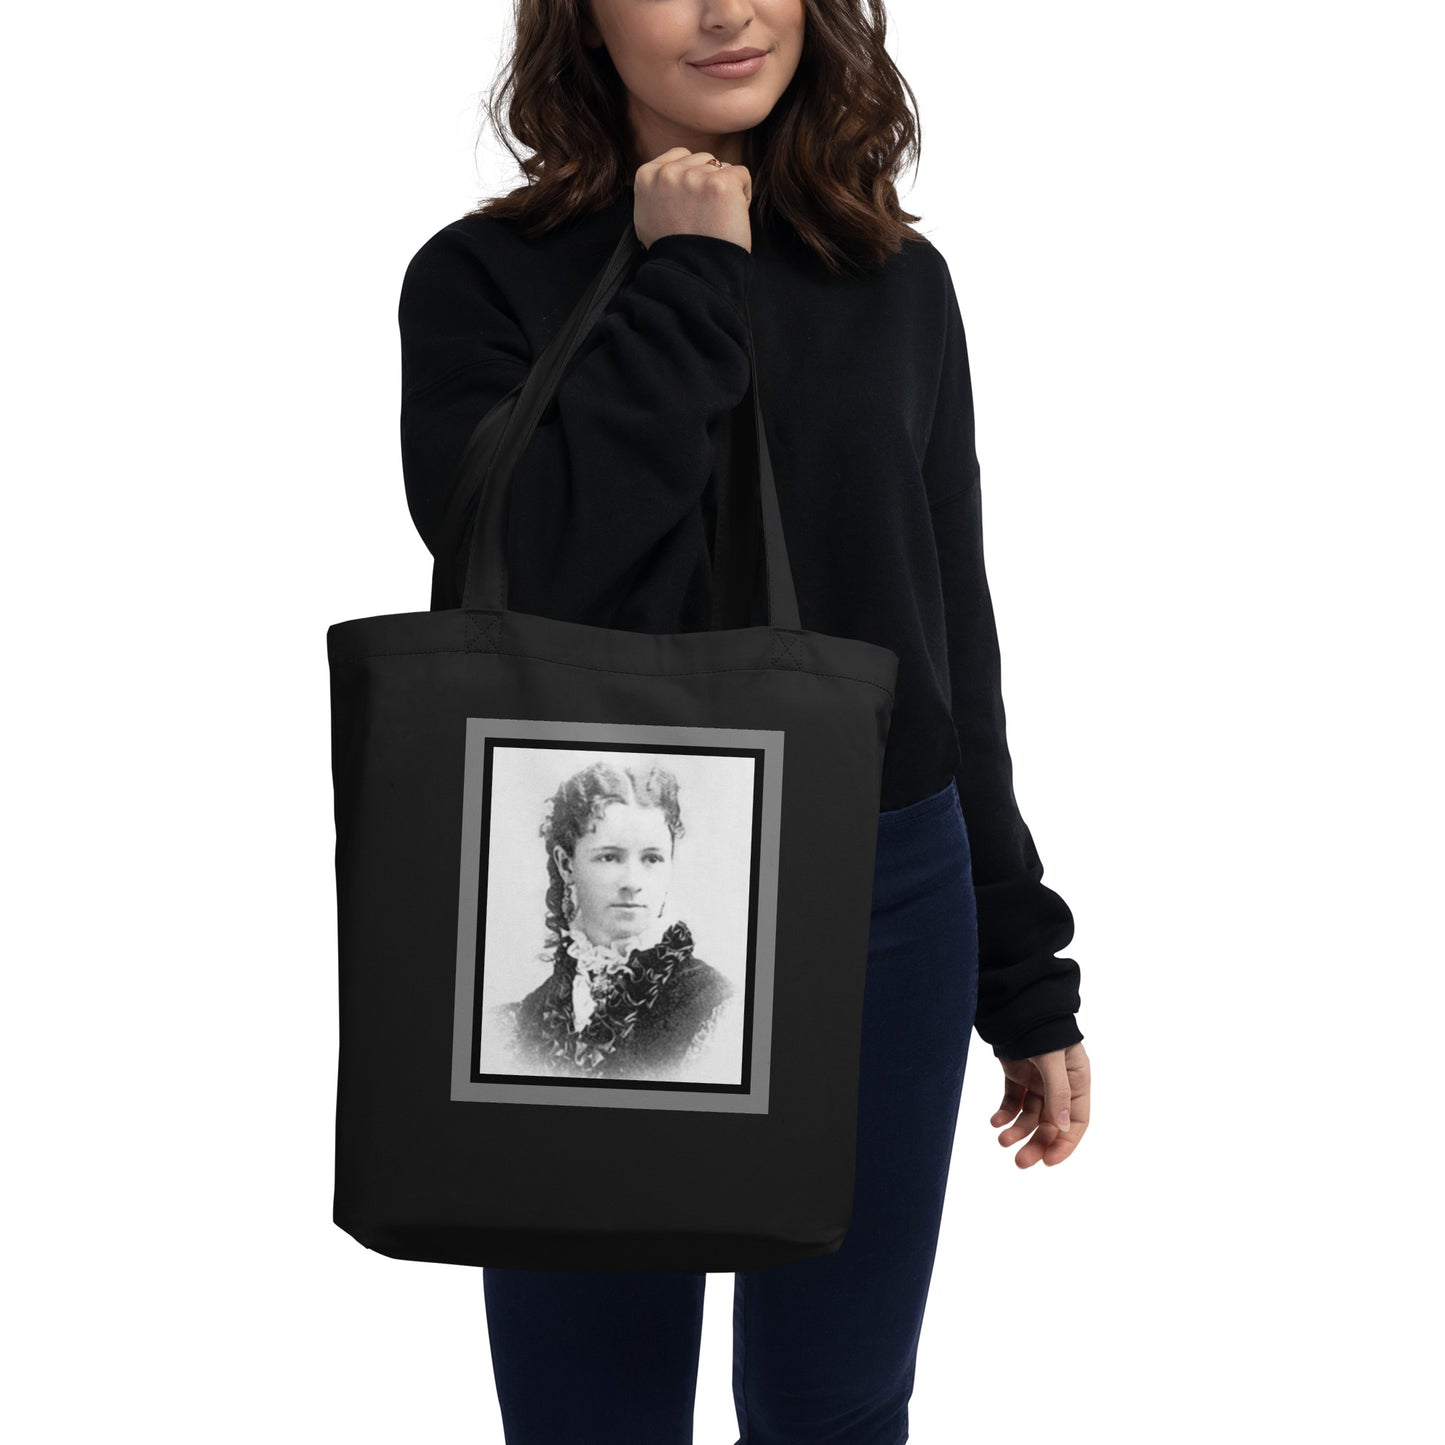 Snooty Fox Art Eco Garden Tote Bag - Kate O. Sessions